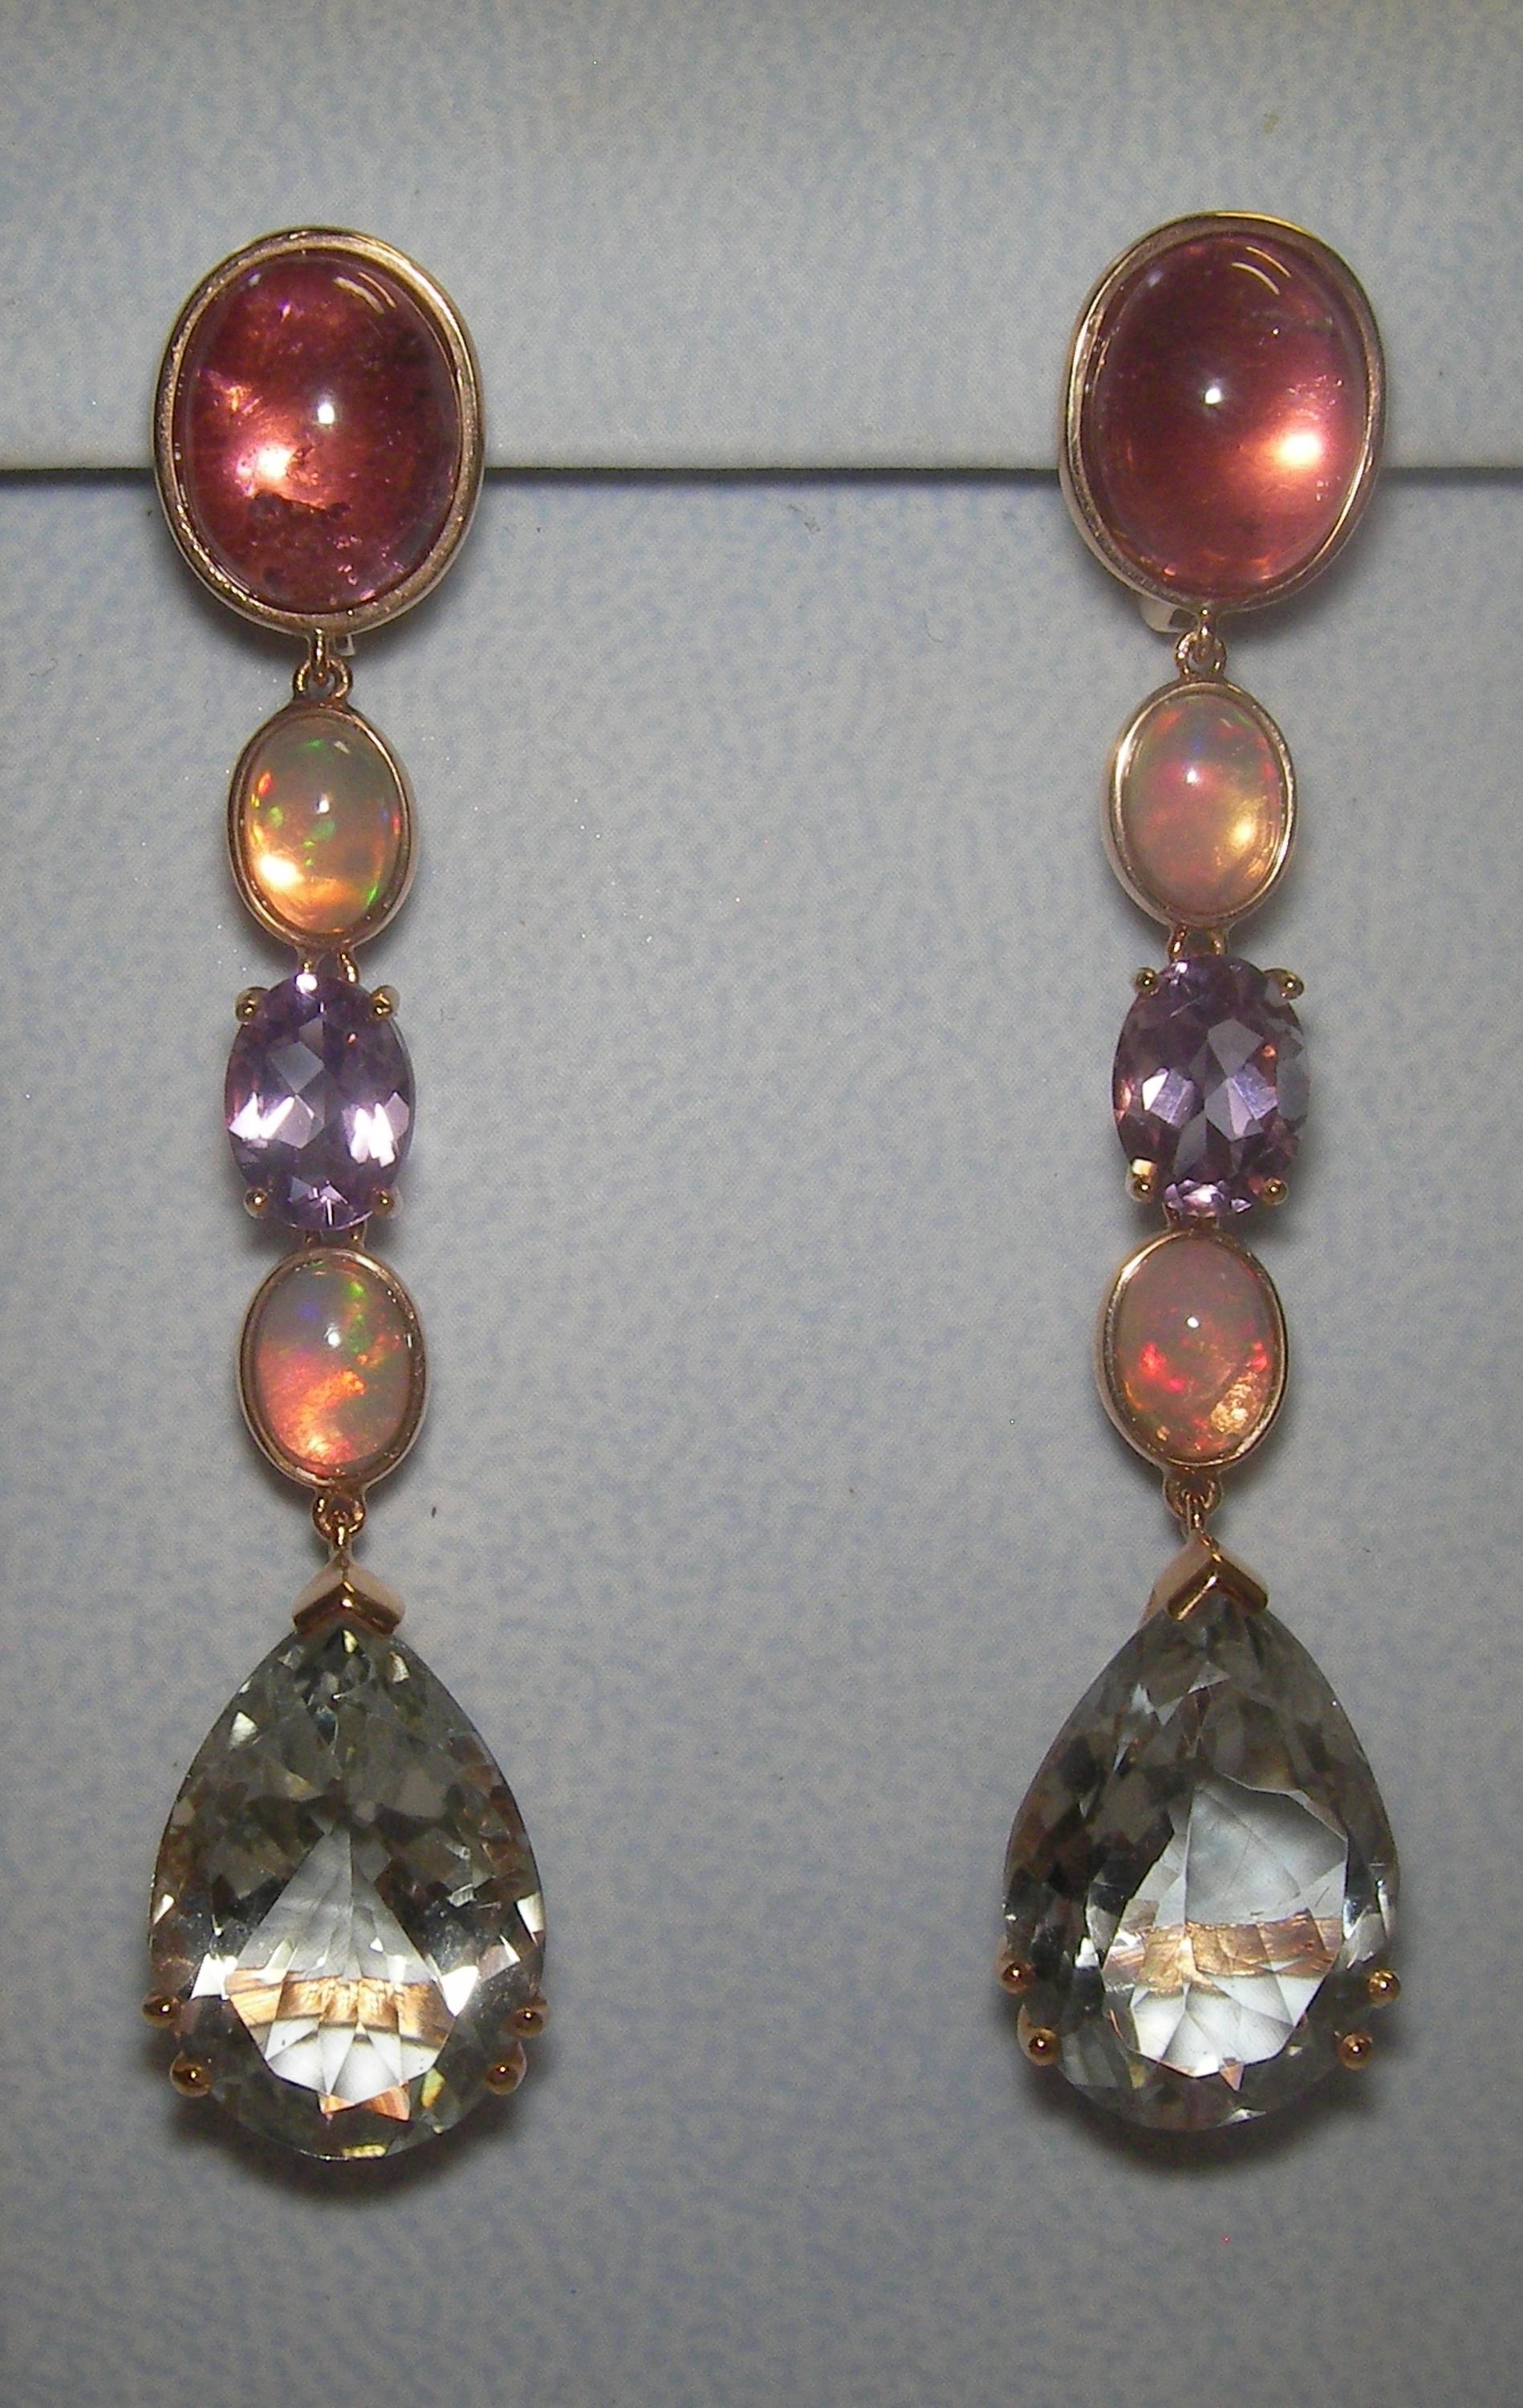 18 Karat Rose Gold  color Stones Dangle Earrings

4 Opal 2.09  Carat.
2  Green Ametyst 19.72 Carat
2 Tourmaline 8.93  Carat
2 Amethyst 2.47 Carat







Founded in 1974, Gianni Lazzaro is a family-owned jewelery company based out of Düsseldorf,